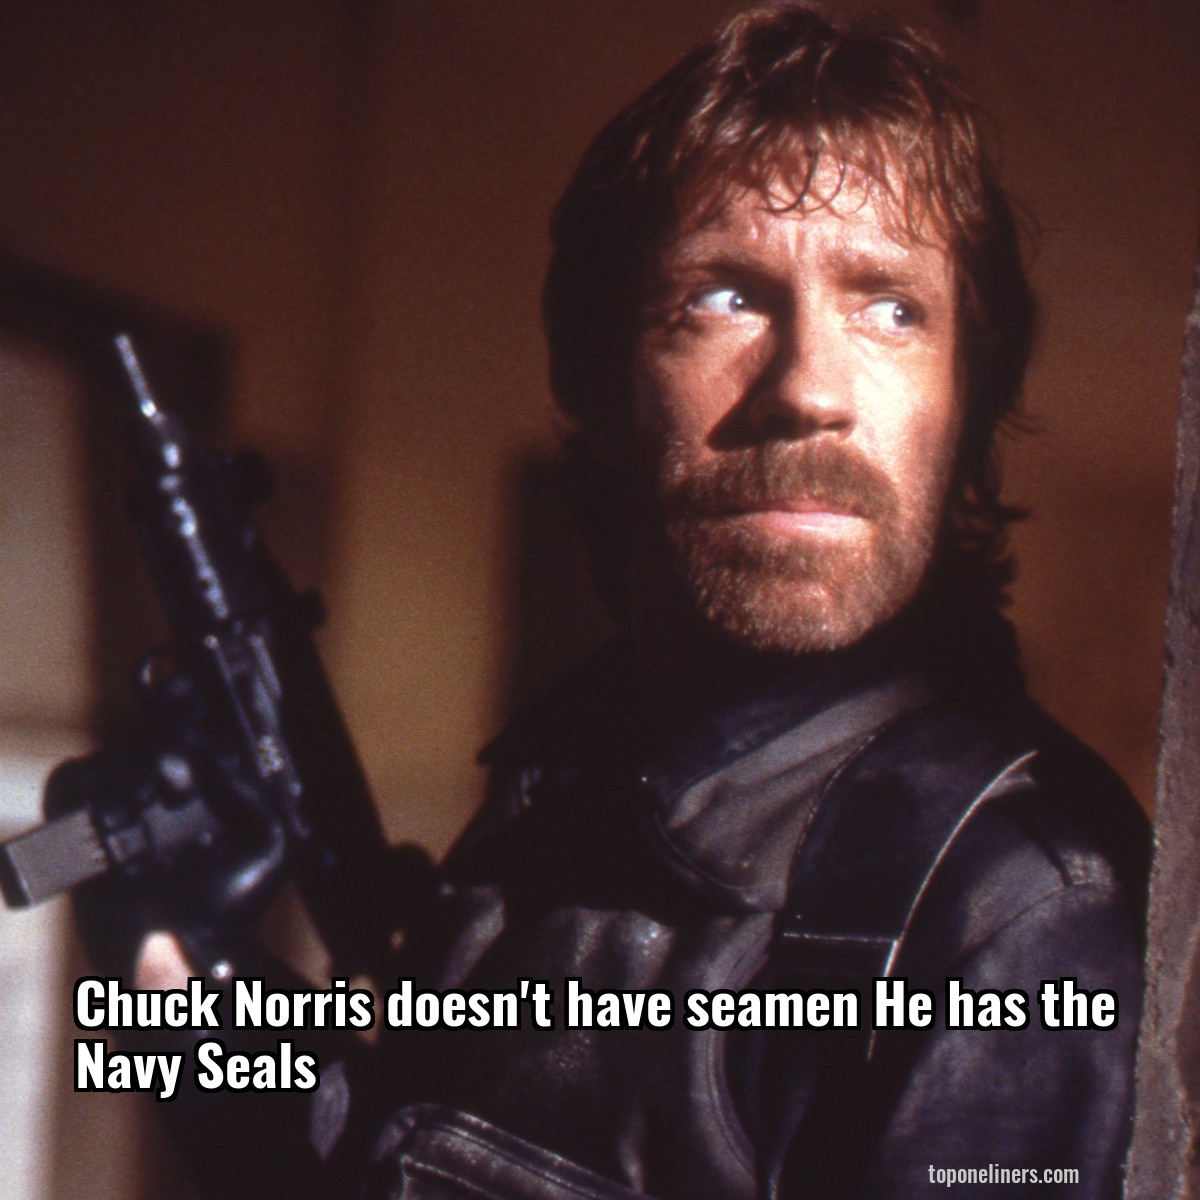 Chuck Norris doesn't have seamen He has the Navy Seals